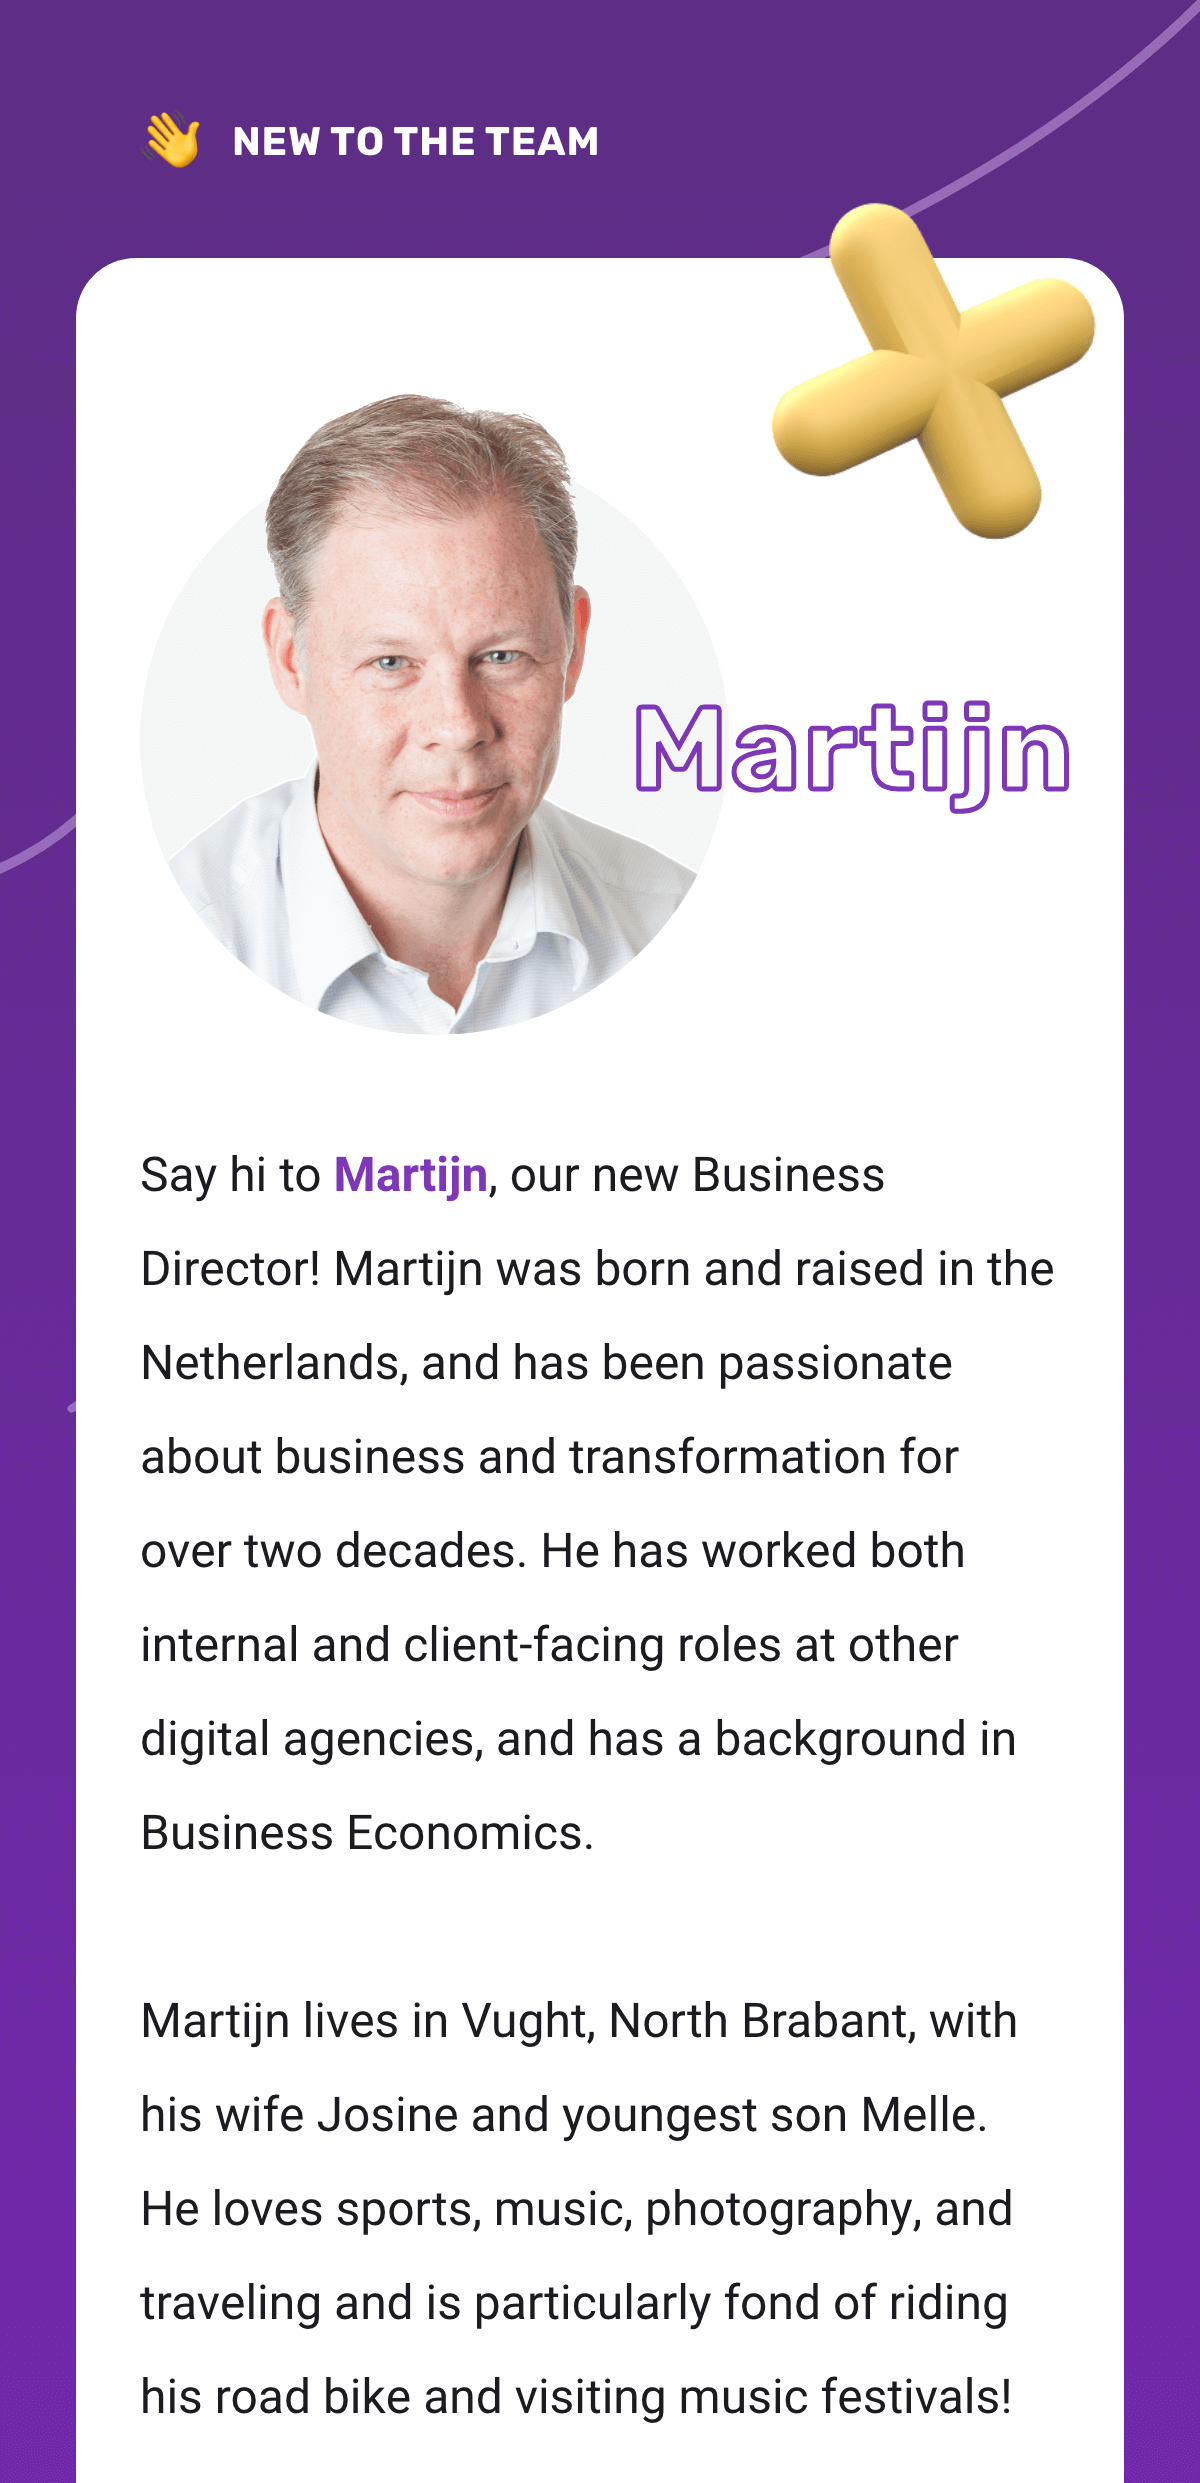 Martijn's new to the team part